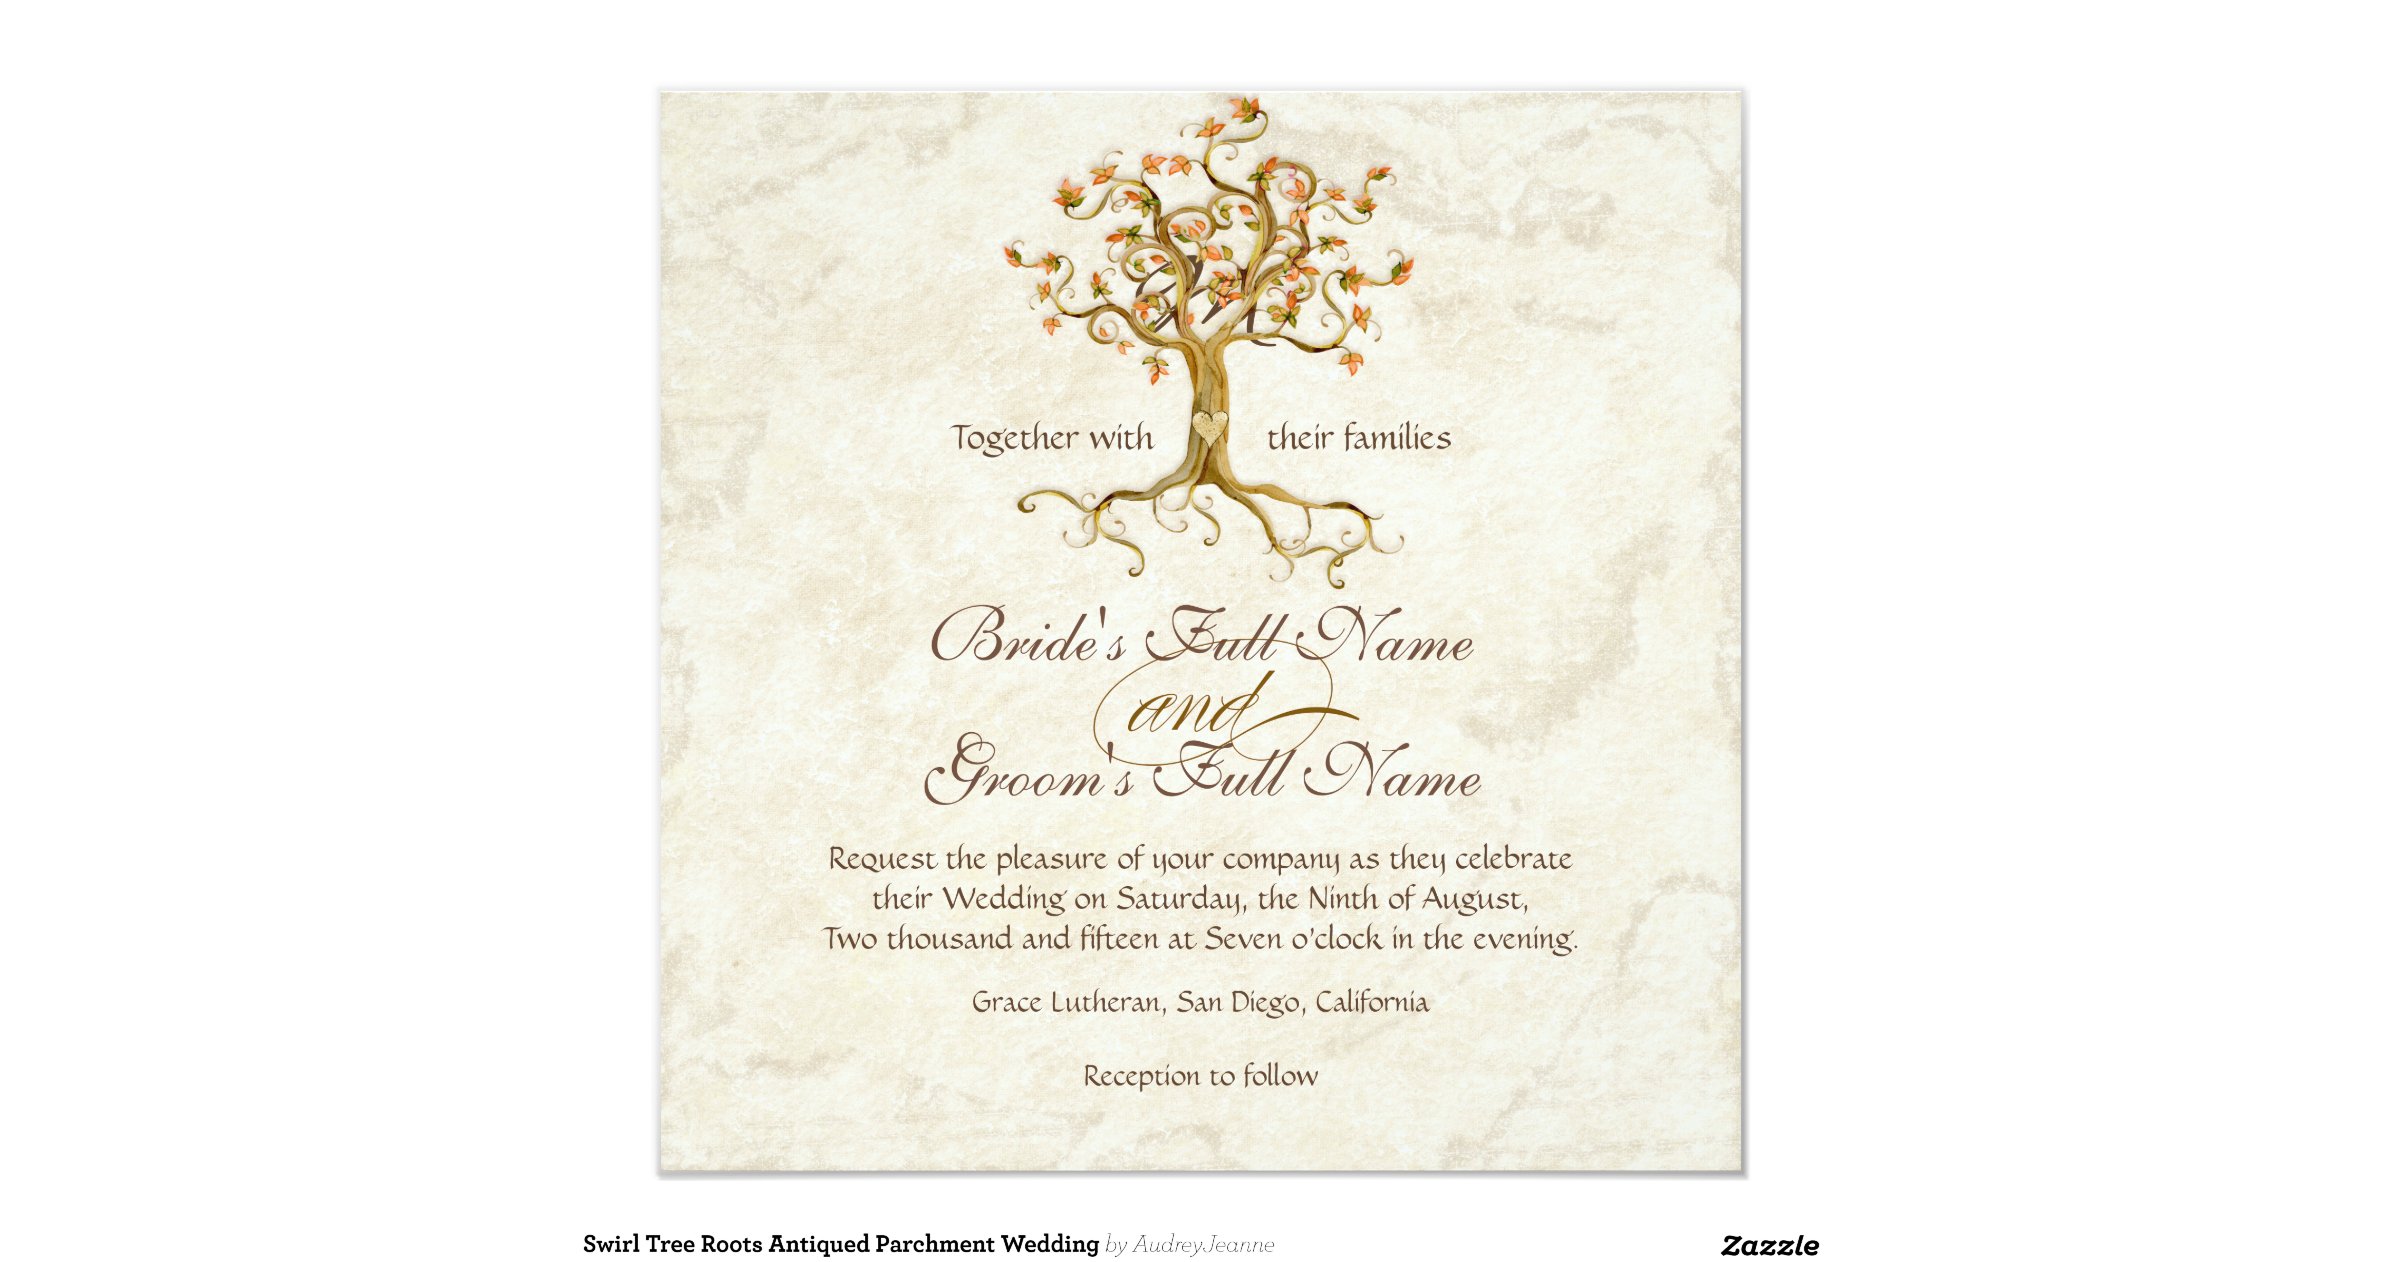 swirl_tree_roots_antiqued_parchment_wedding_invitation ...